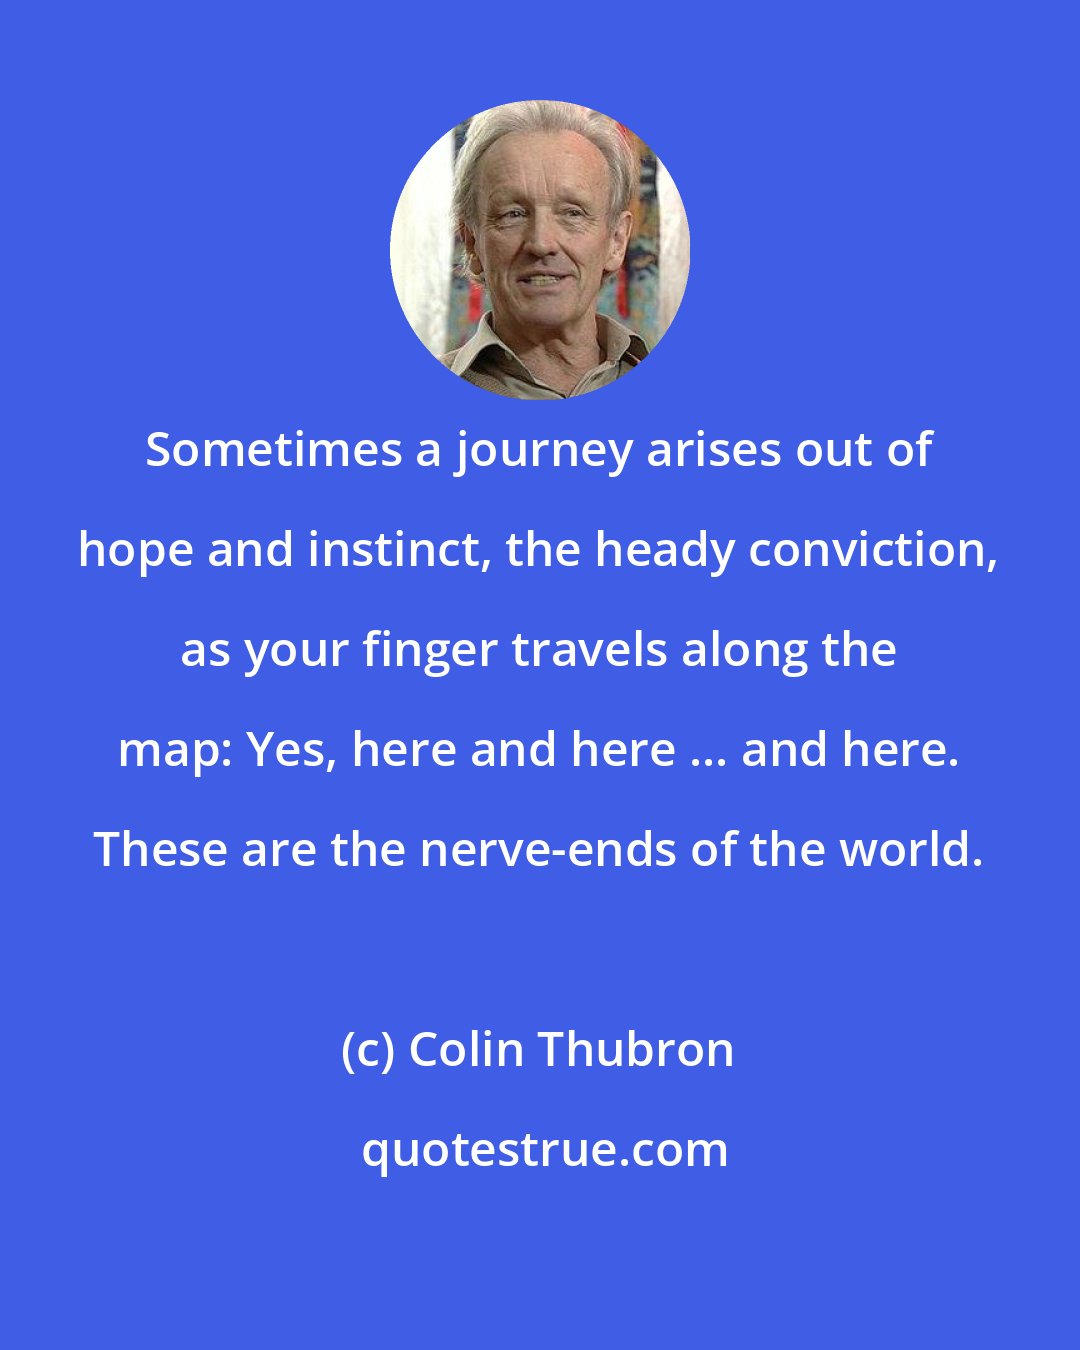 Colin Thubron: Sometimes a journey arises out of hope and instinct, the heady conviction, as your finger travels along the map: Yes, here and here ... and here. These are the nerve-ends of the world.